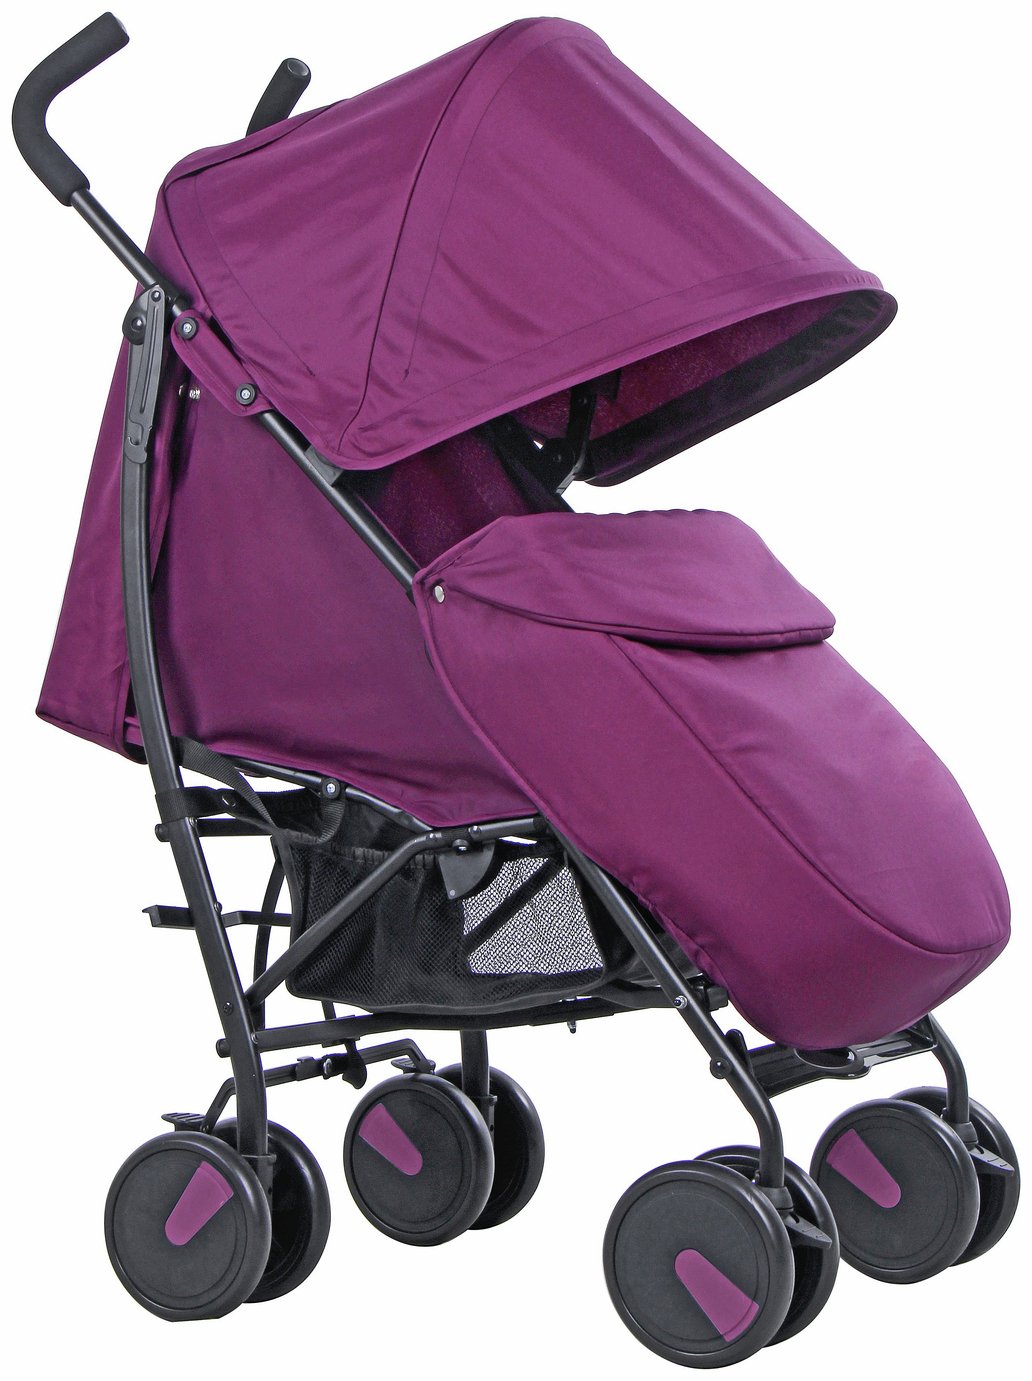 Cuggl Maple Pushchair - Mulberry